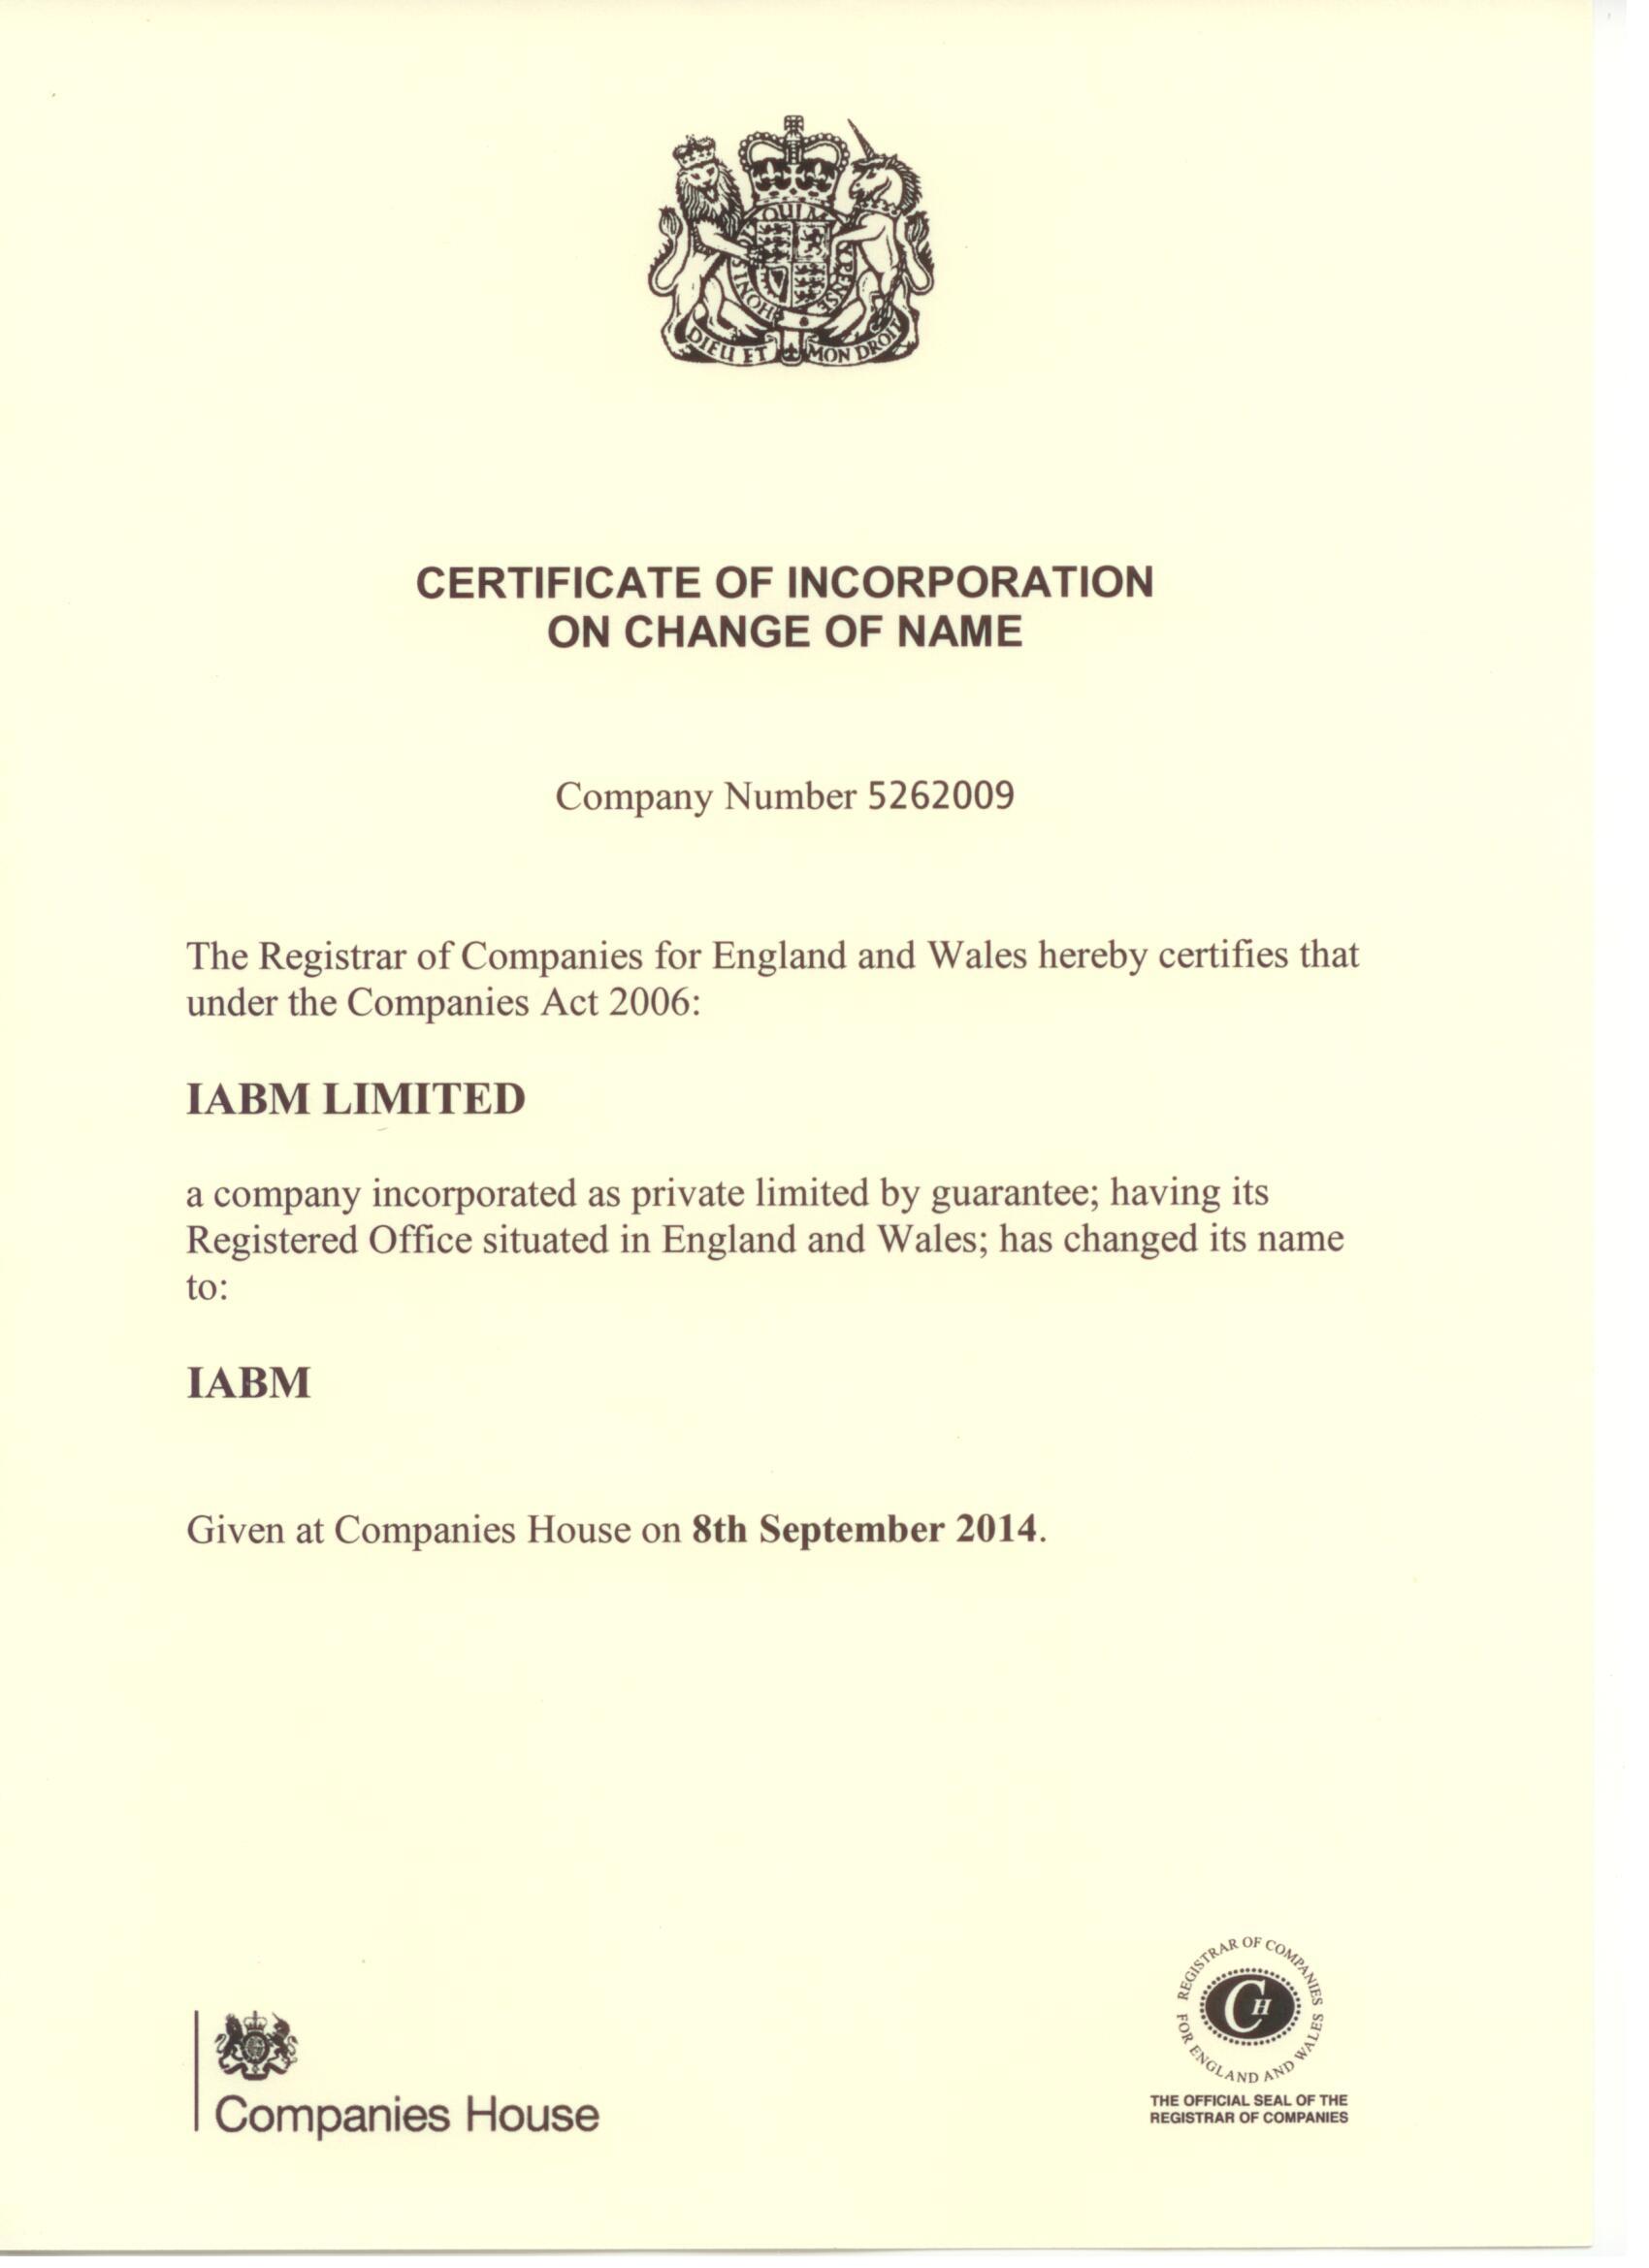 Certificate of incorporation document